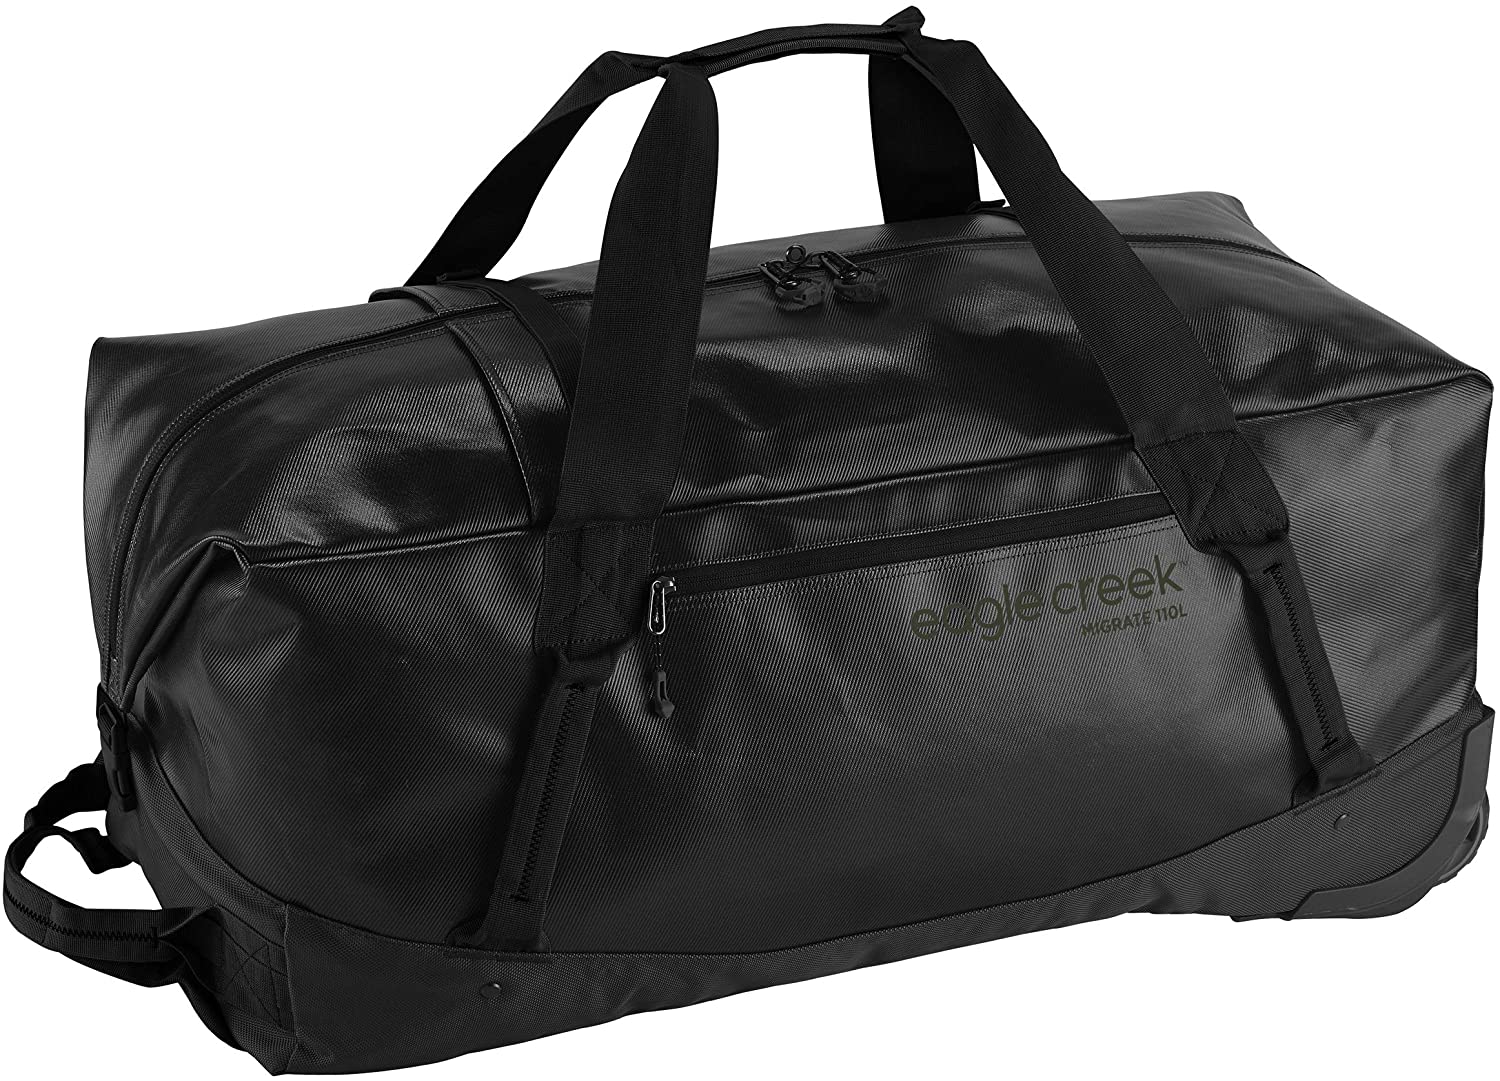 Eagle Creek Migrate Wheeled Duffel 110 Liter in Jet Black color from the front